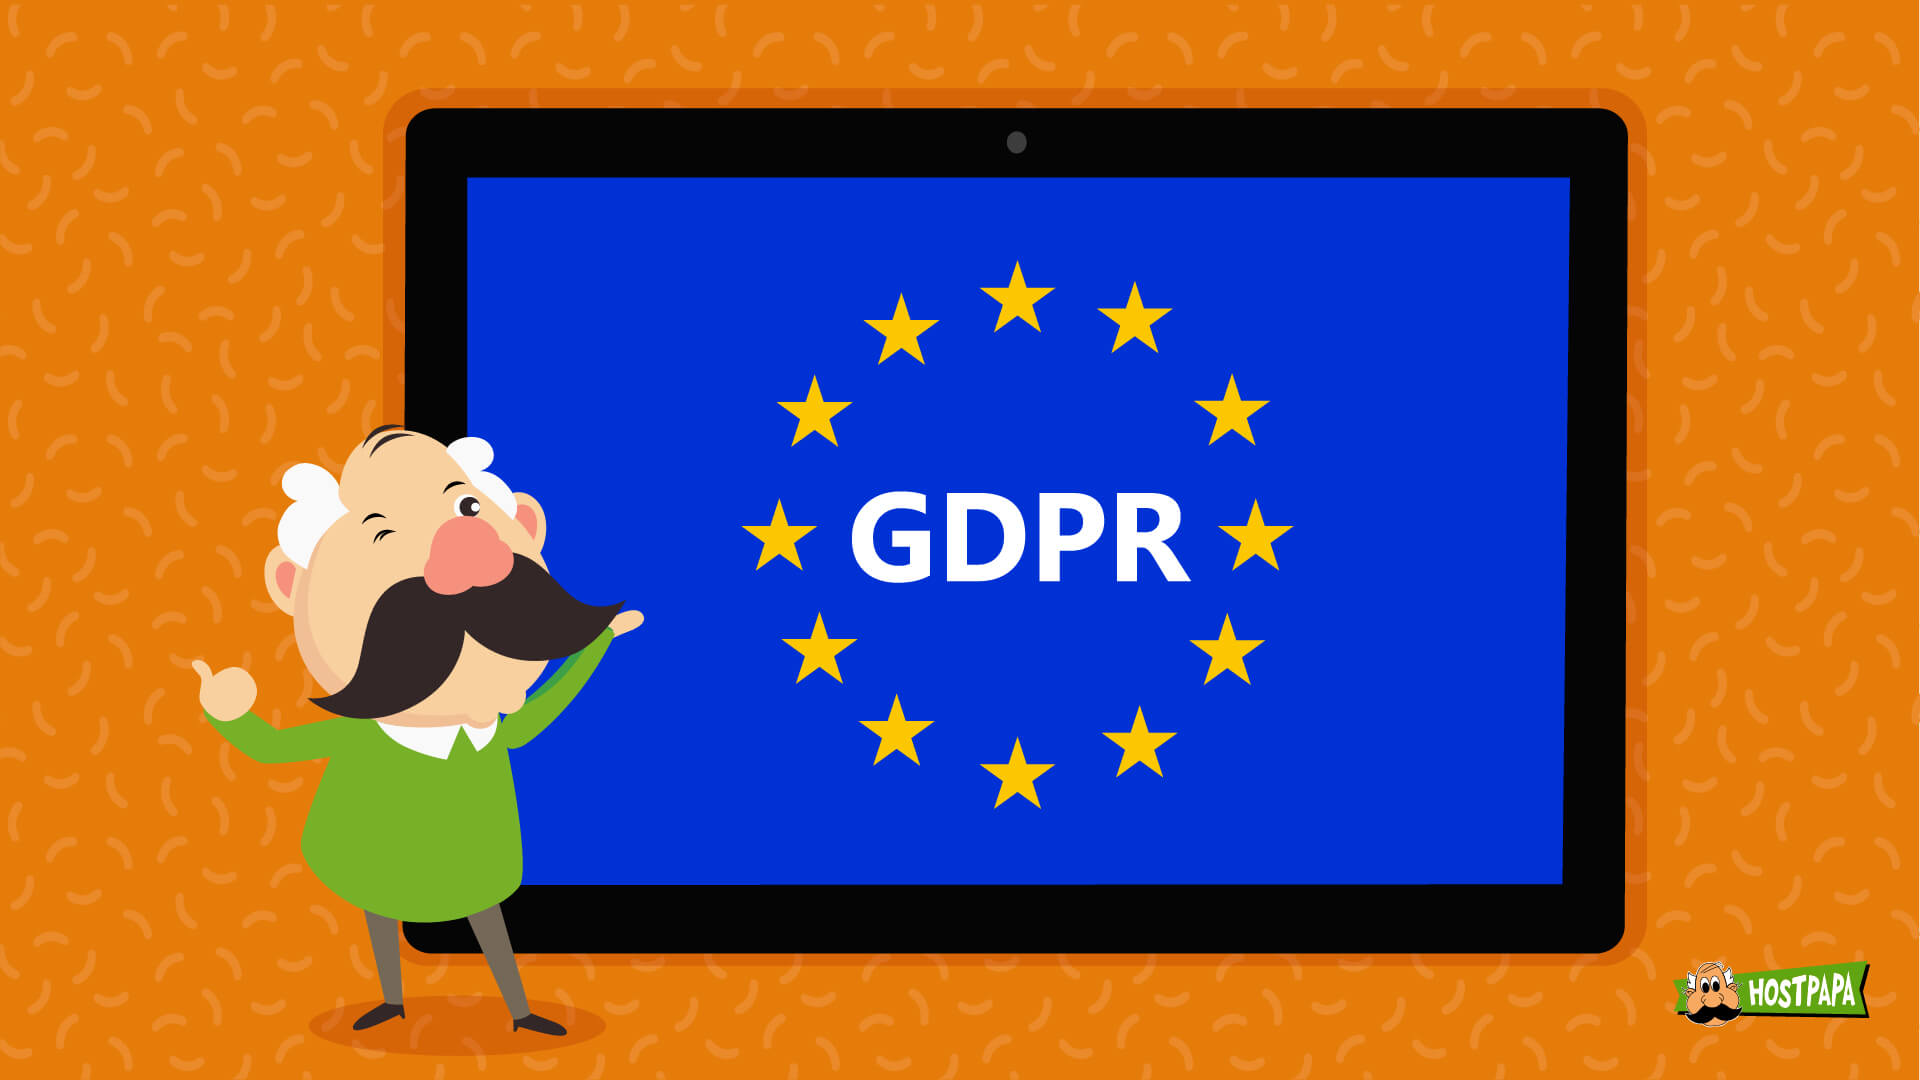 GDPR Compliance for Email Marketing